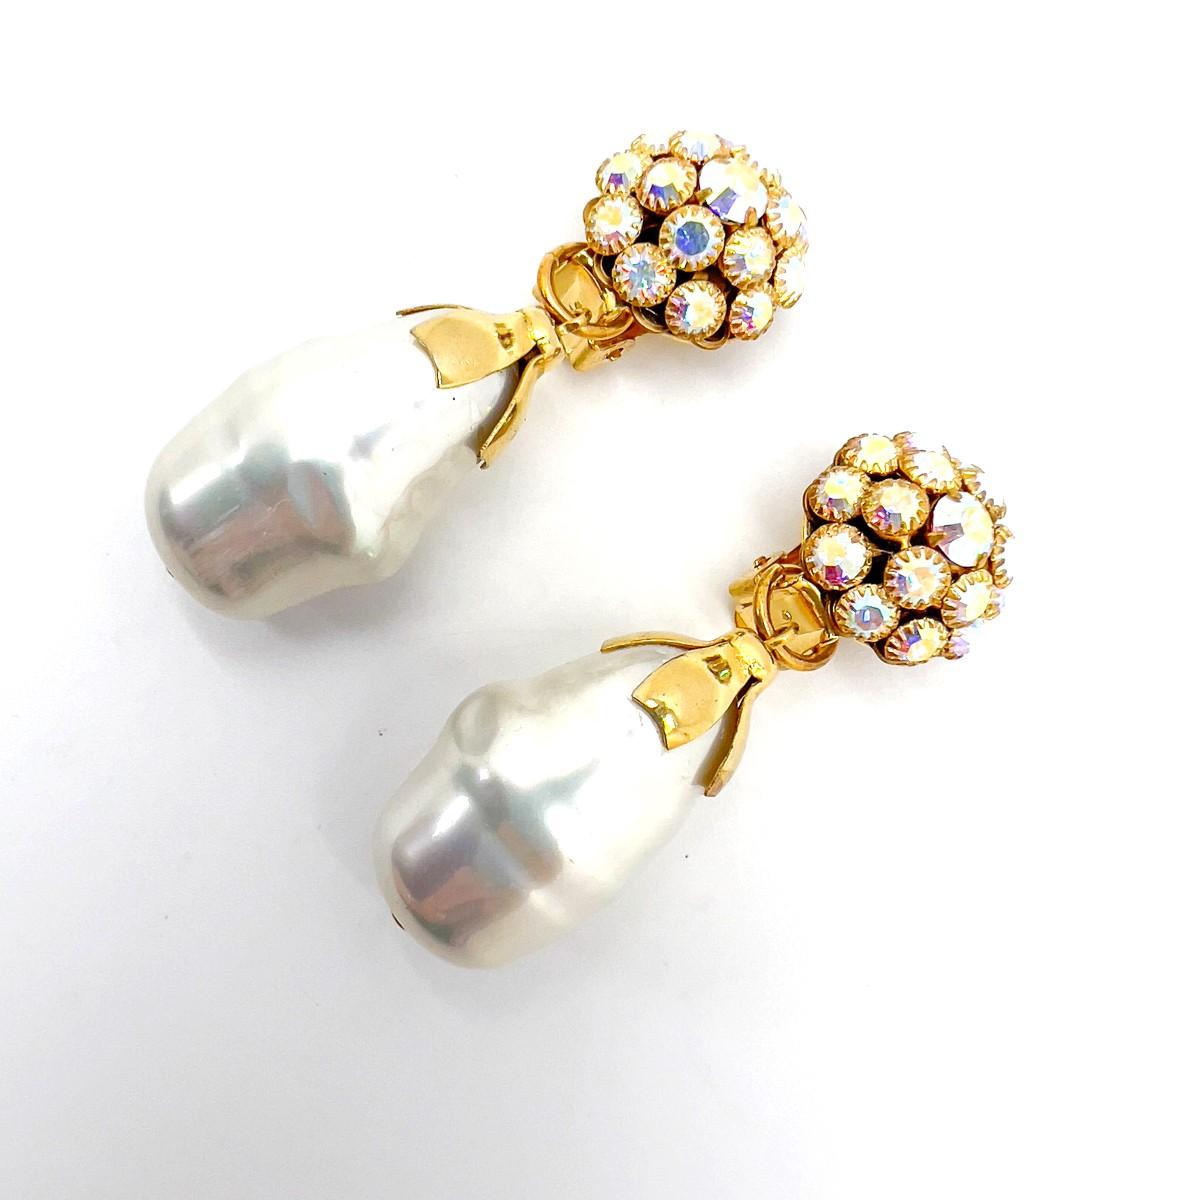 Vintage Aurora Borealis Baroque Pearl Drop Earrings1960s In Good Condition For Sale In Wilmslow, GB